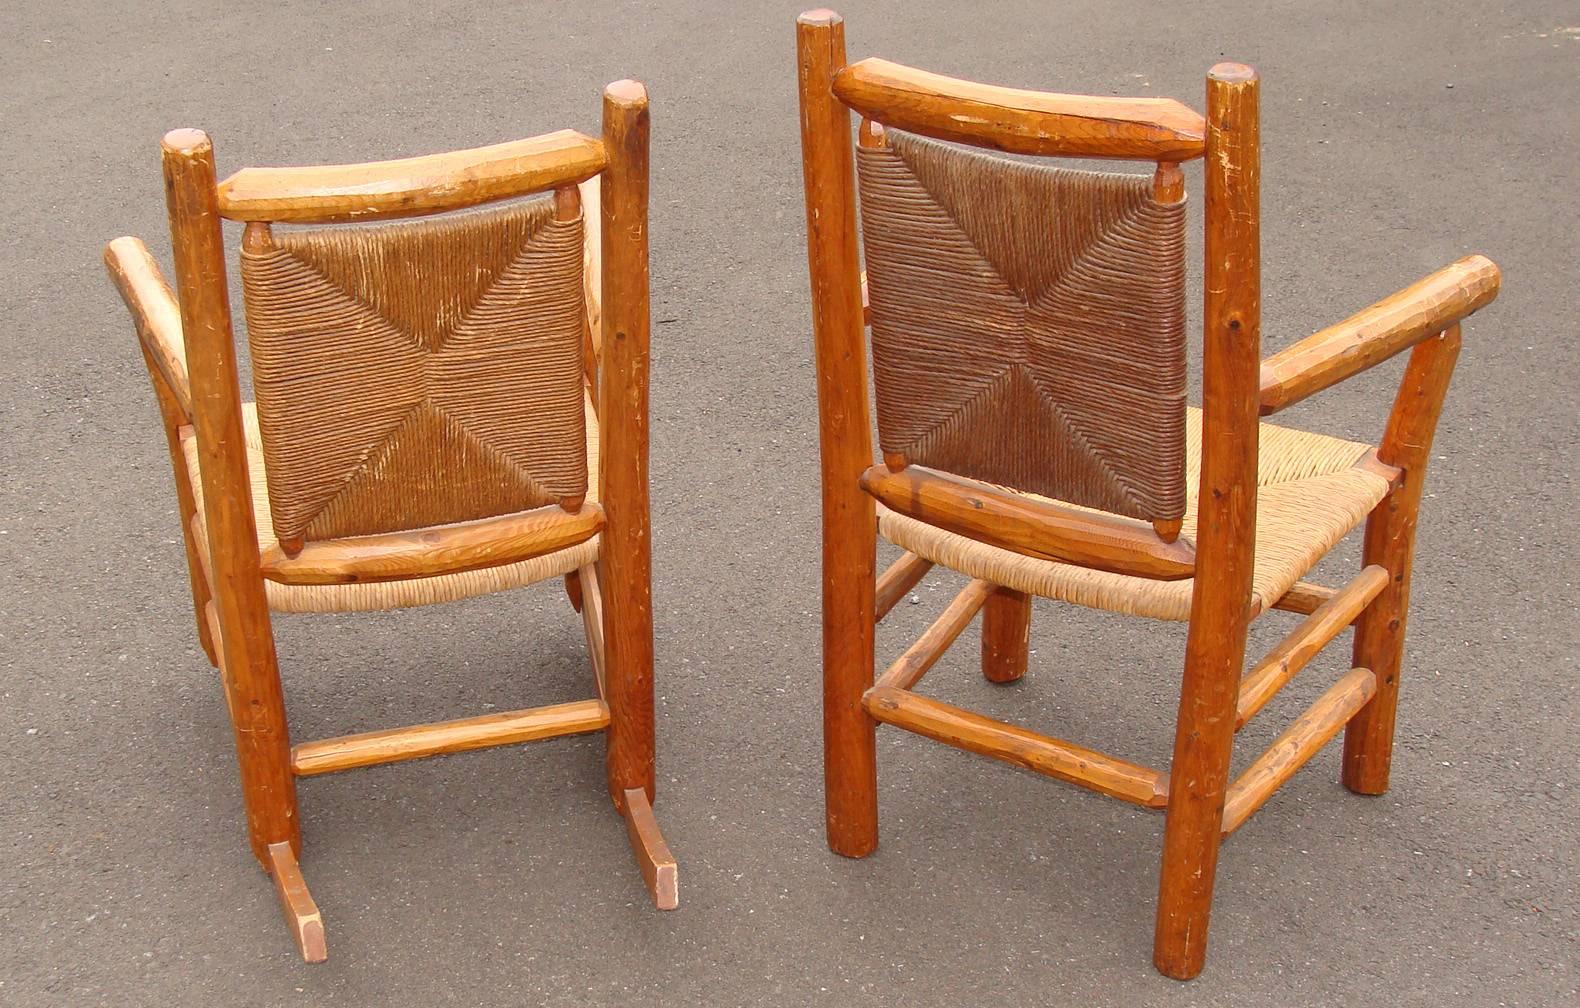 Wonderful rustic or Adirondack style rocker and matching armchair in cedar with rush seats and backs.
Amazing comfort. Honey colored finish blends integrates with modern or traditional decor. Rush seats were likely re-done about 15-20 years ago.